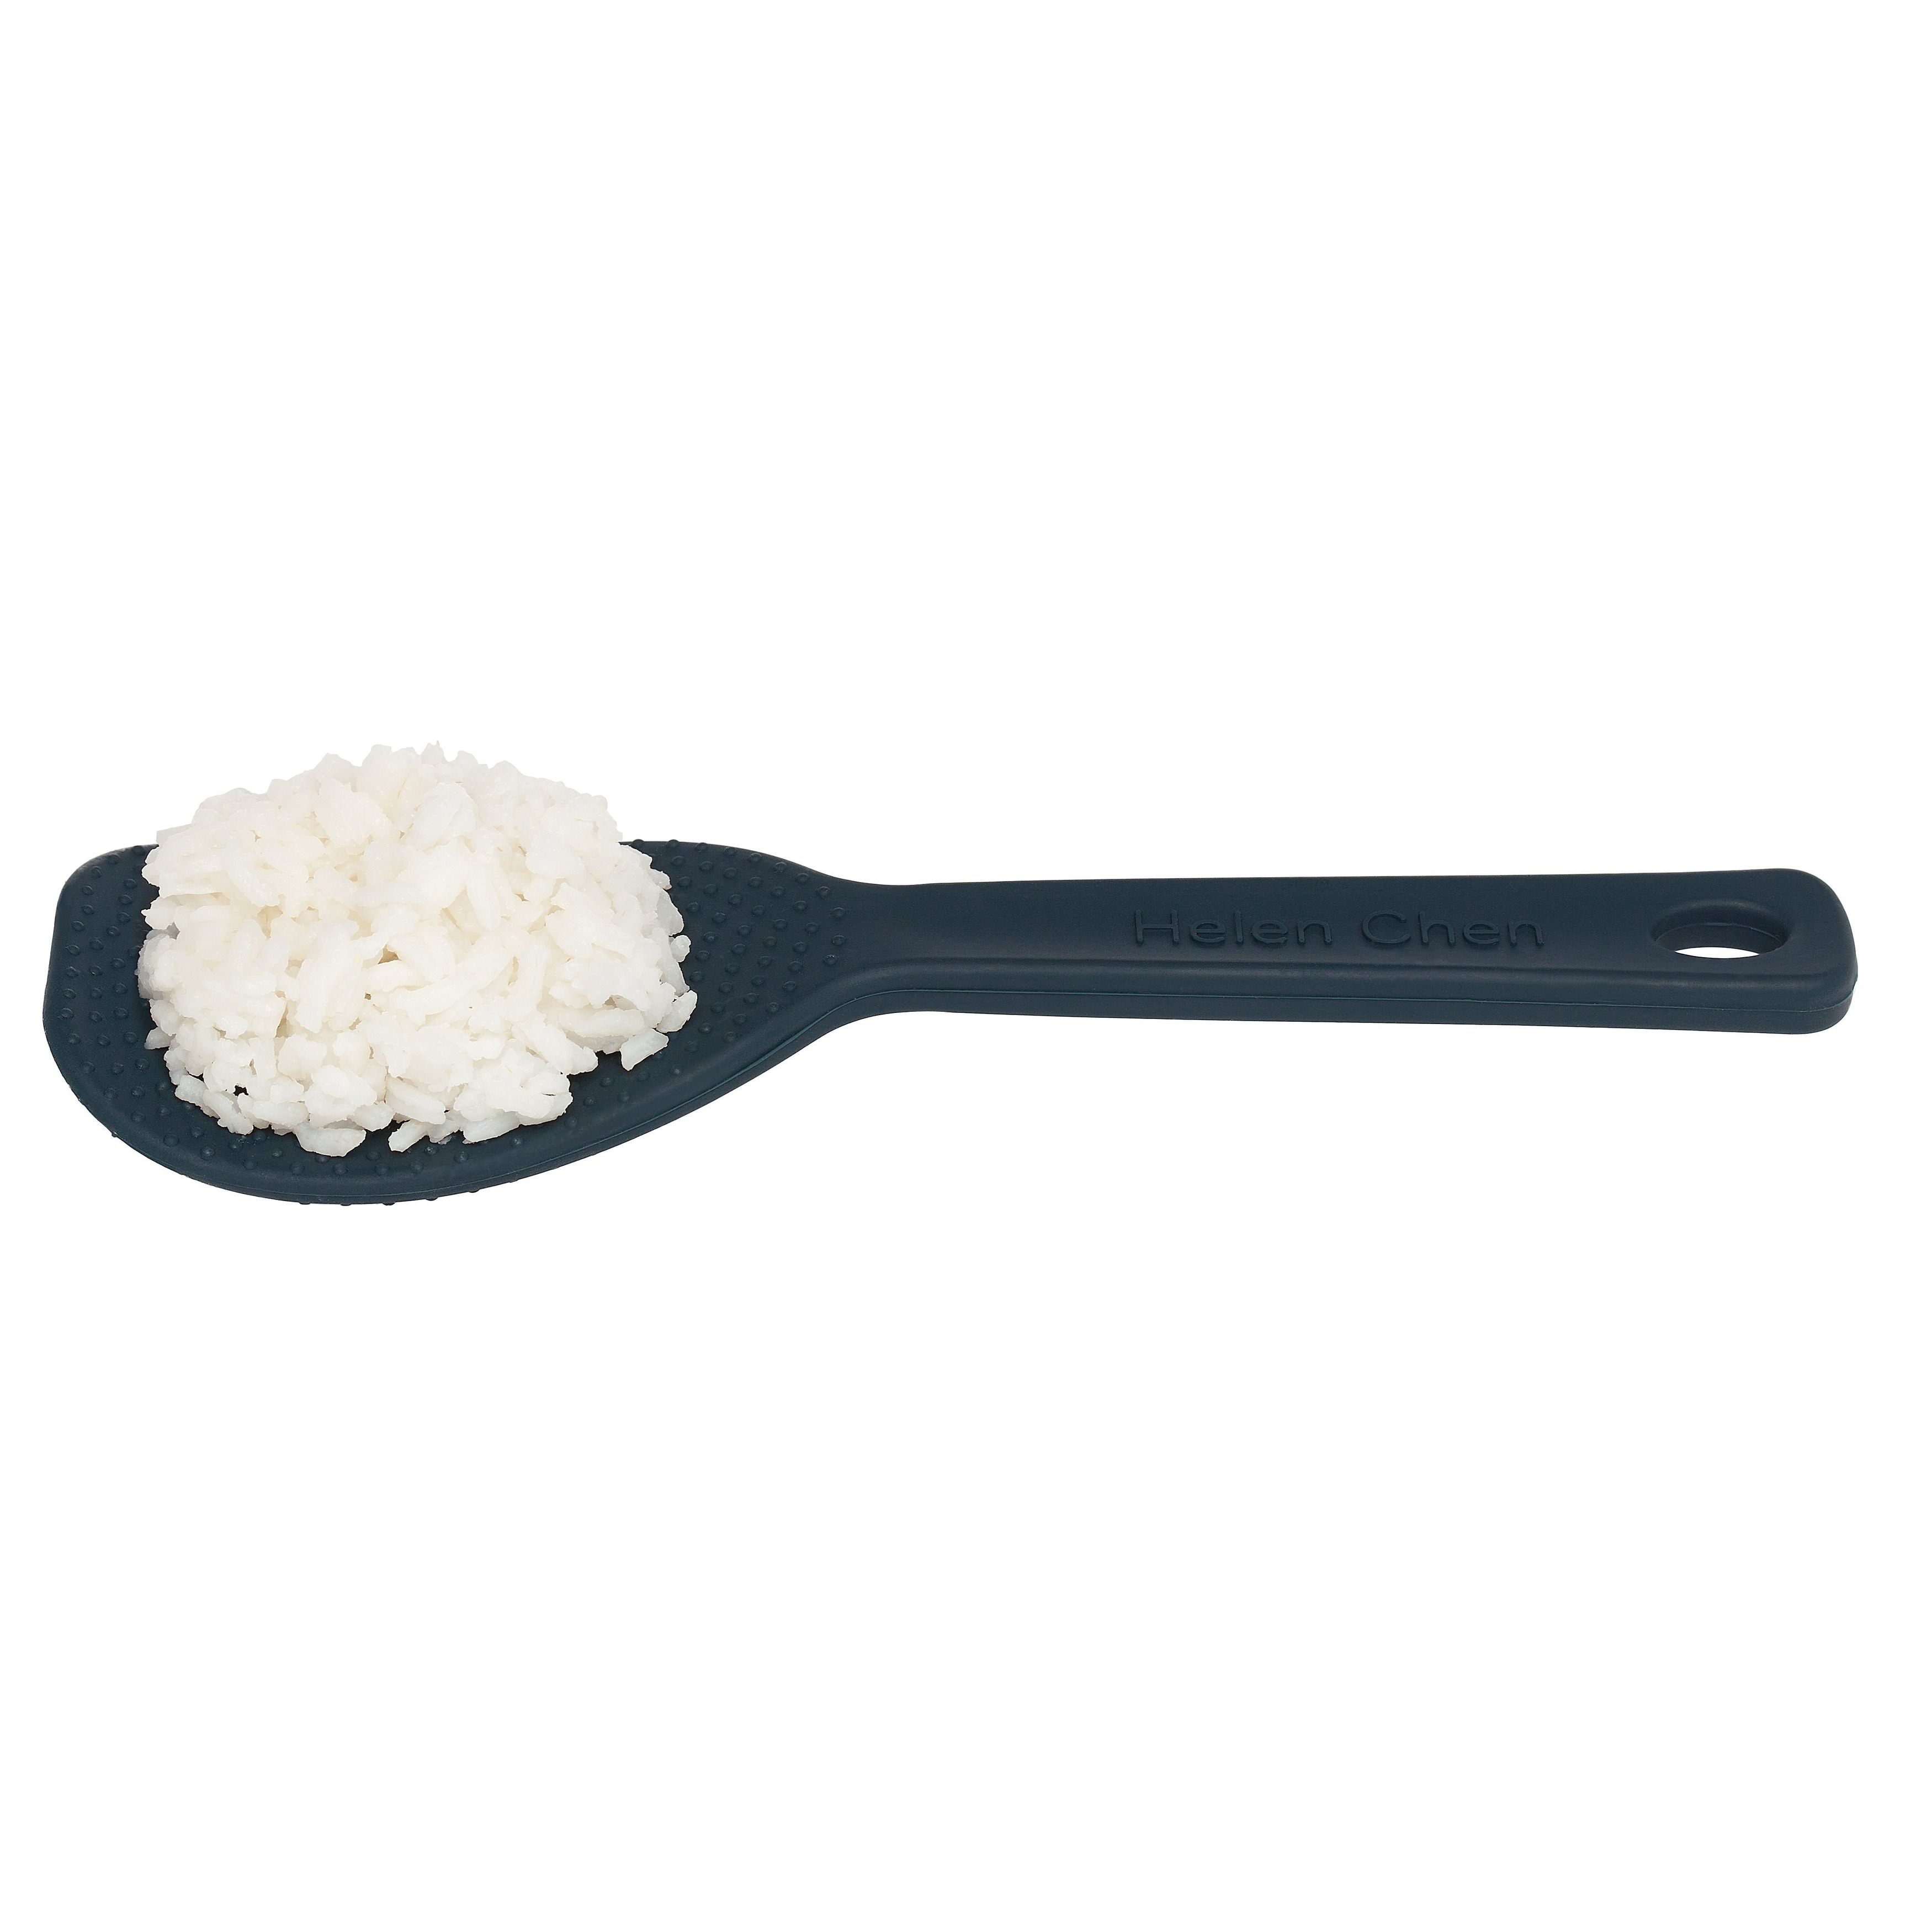 Details about   Helen's Asian Kitchen 8.5" Never Stick Silicone Rice Server Spoon Paddle 